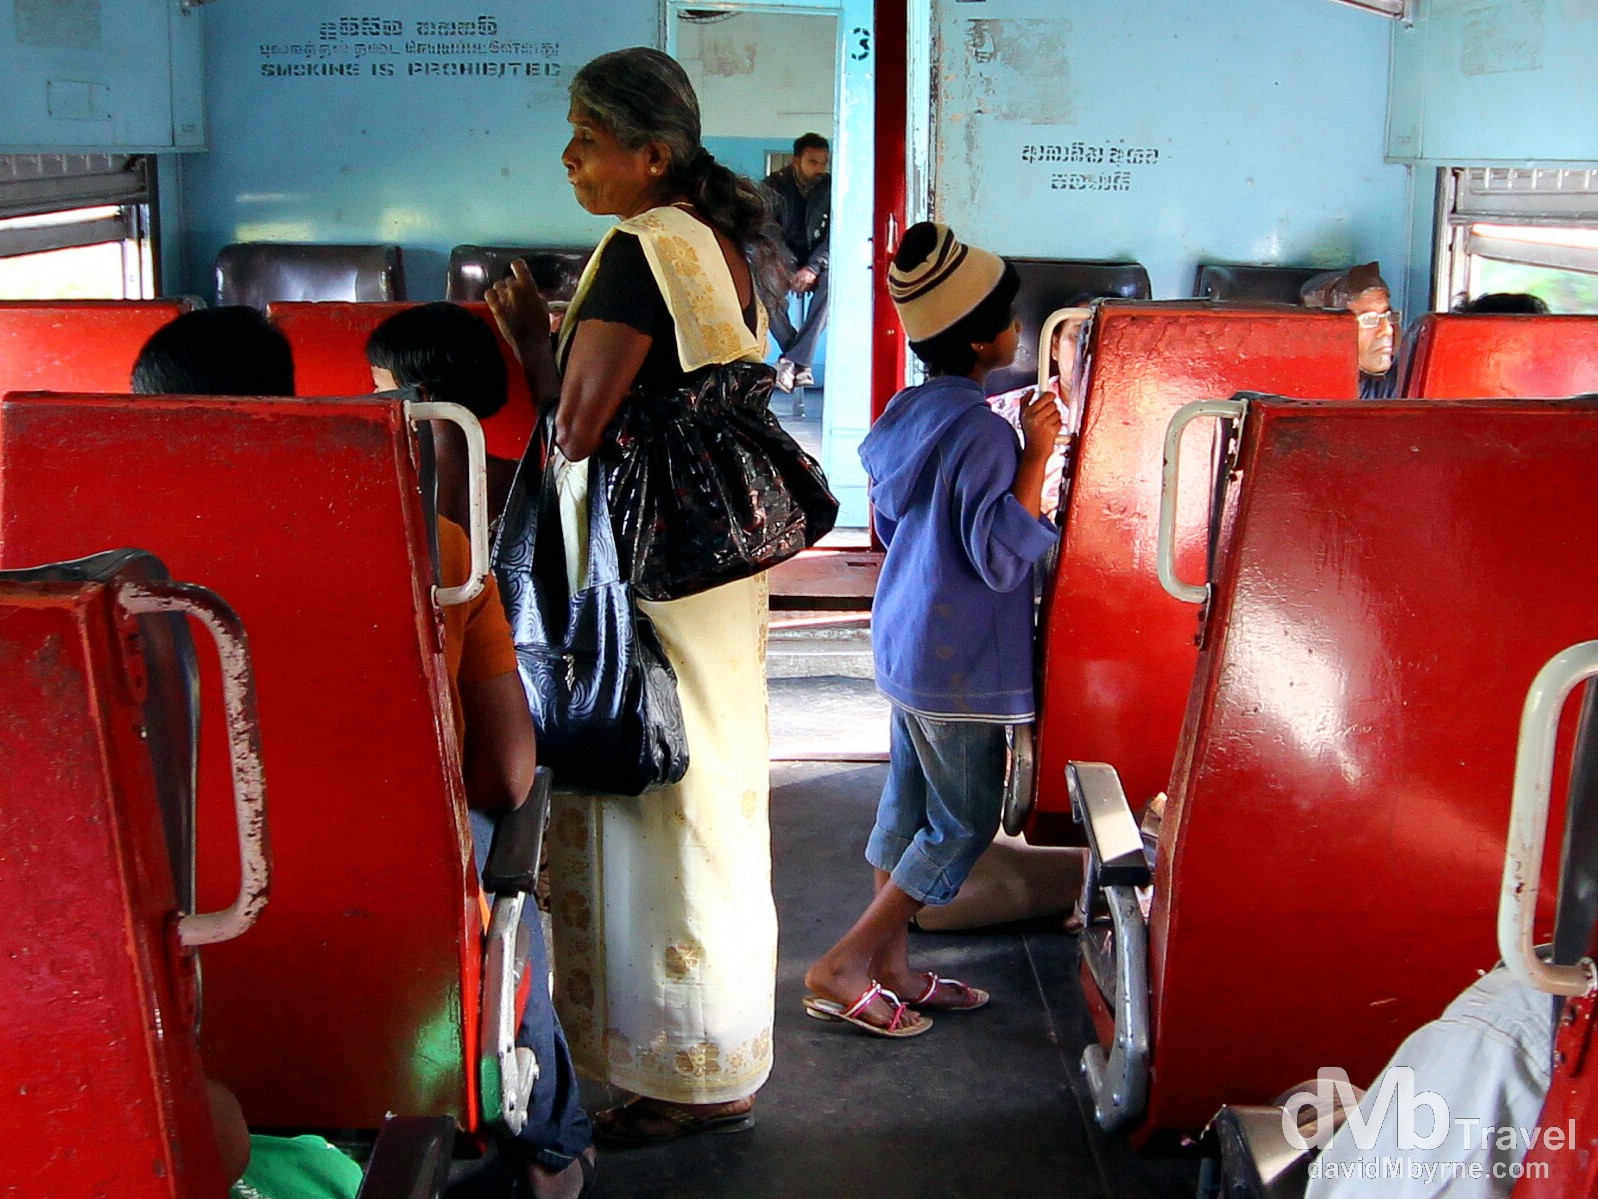 On the Colombo-bound train in central Sri Lanka. September 5th 2012.